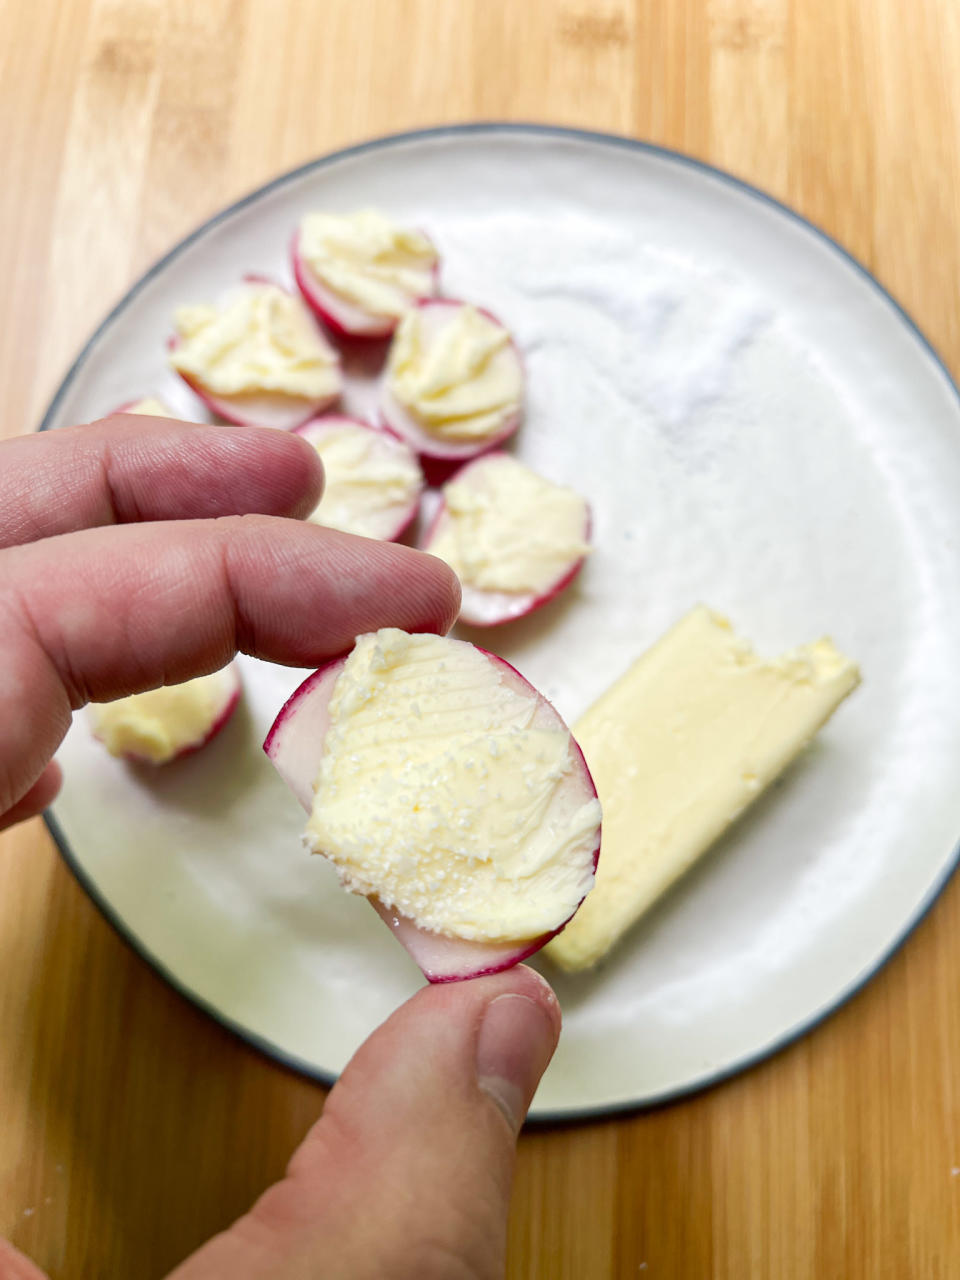 buttered and salted radish in author's hand